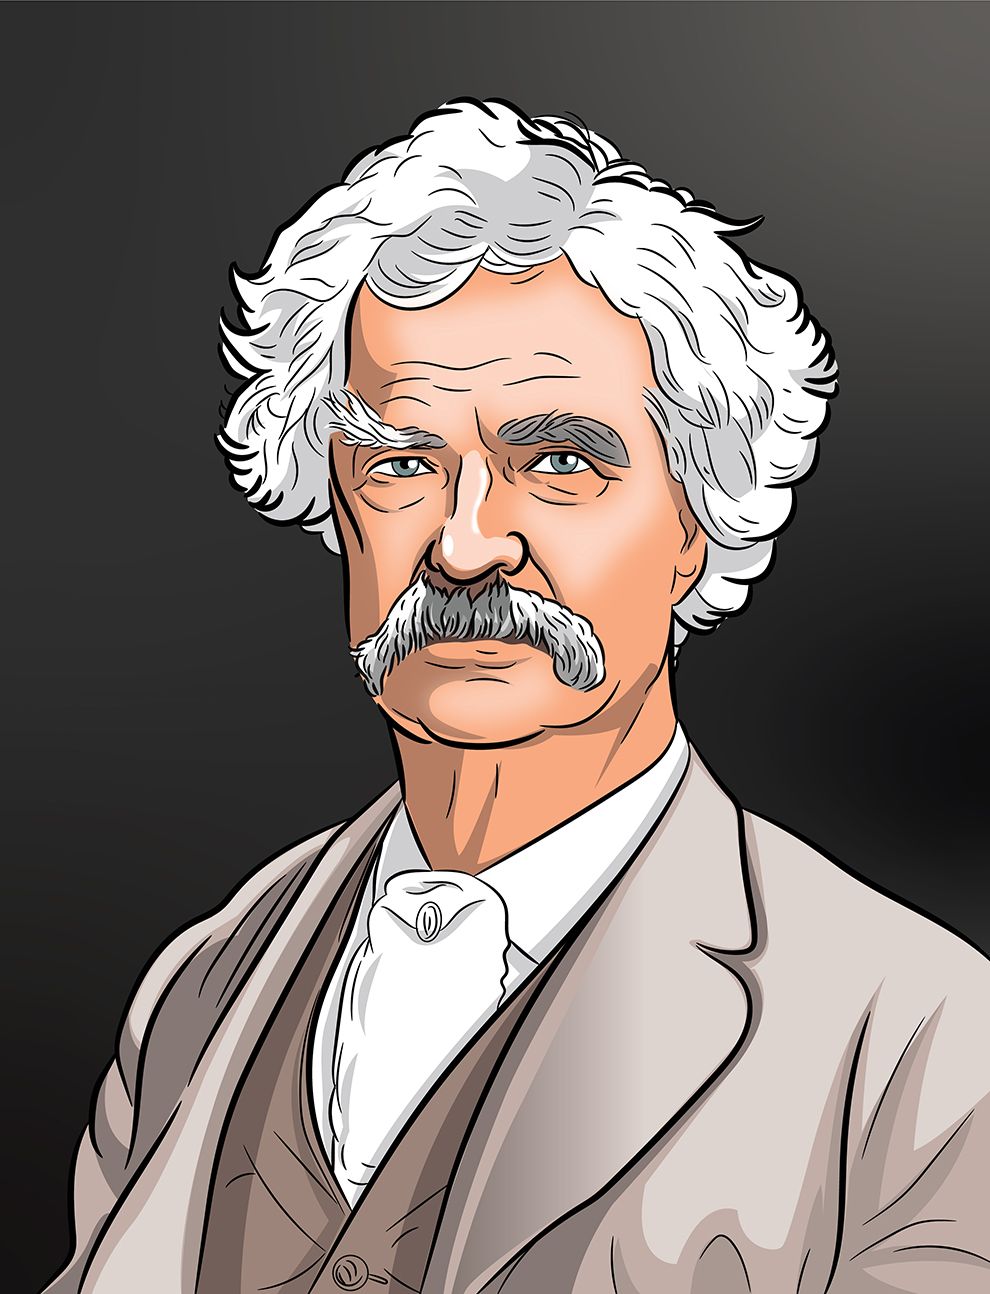 On The Decay Of The Art Of Lying By Mark Twain - News JustIN BookBite - newsjustin.press